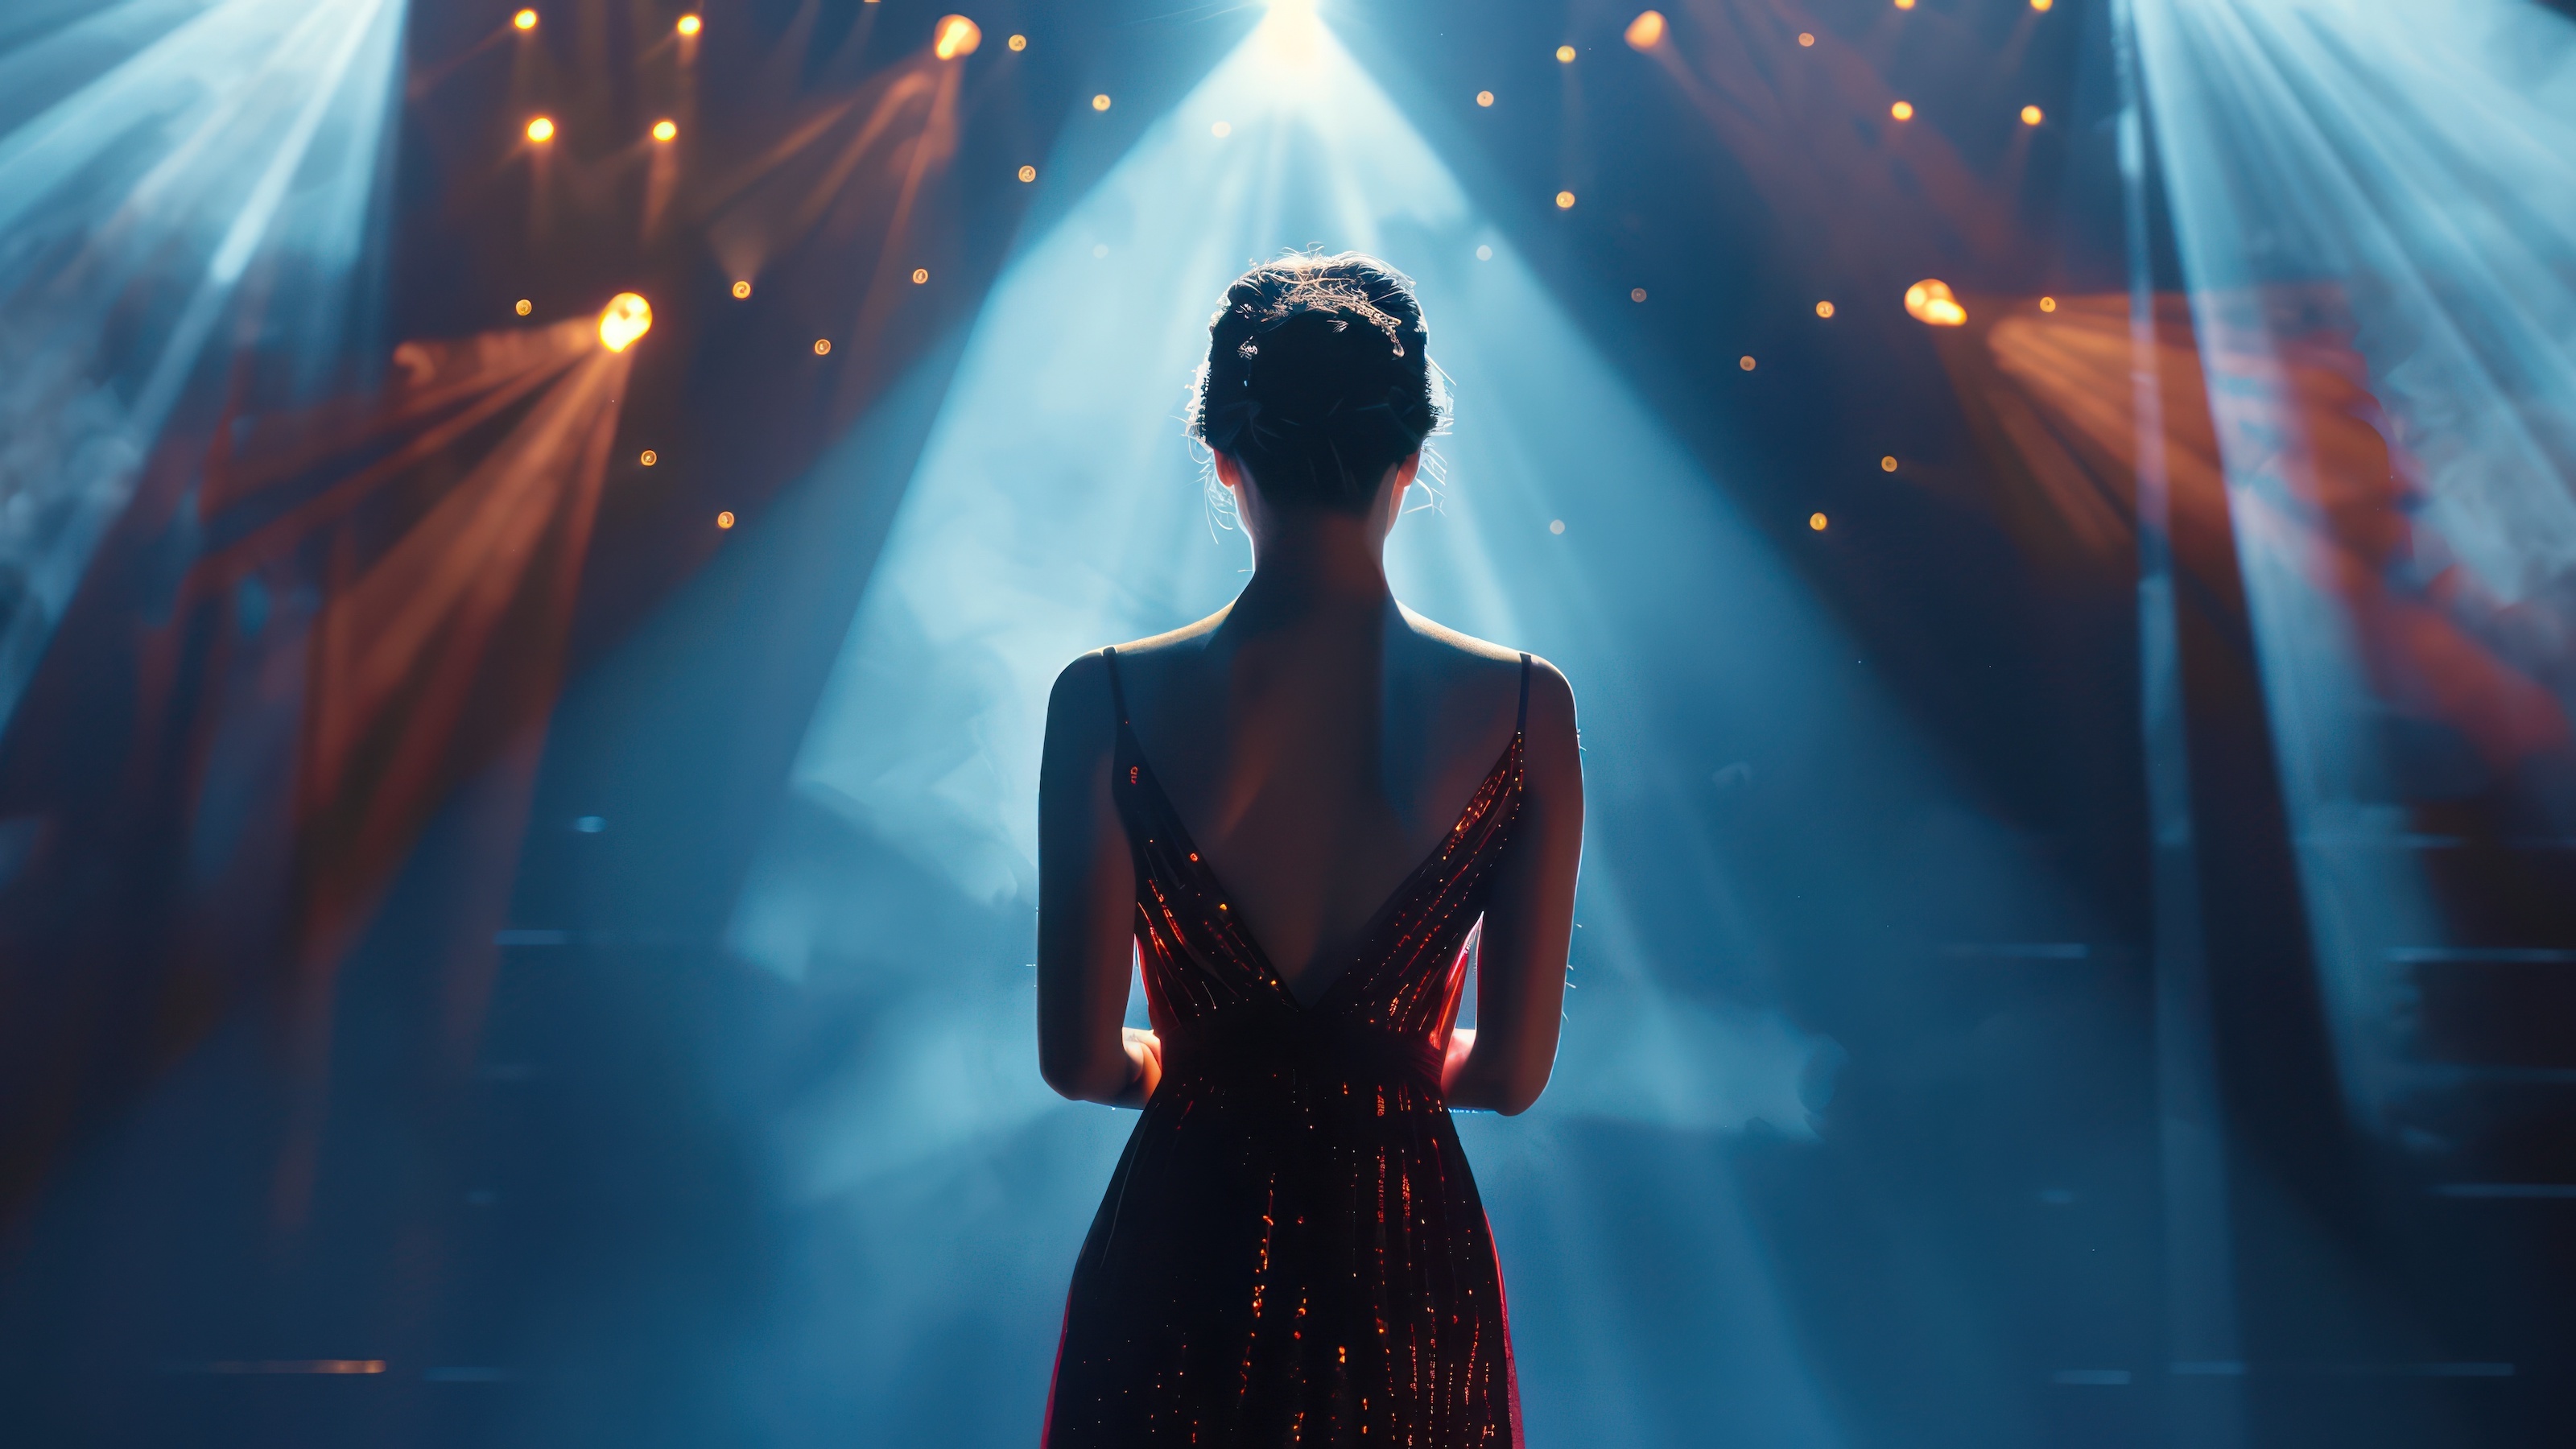 A woman in a backless evening gown stands facing the stage lights, her back to the camera. The scene is illuminated by blue and orange stage lighting, creating a dramatic atmosphere that heightens the spotlight effect.